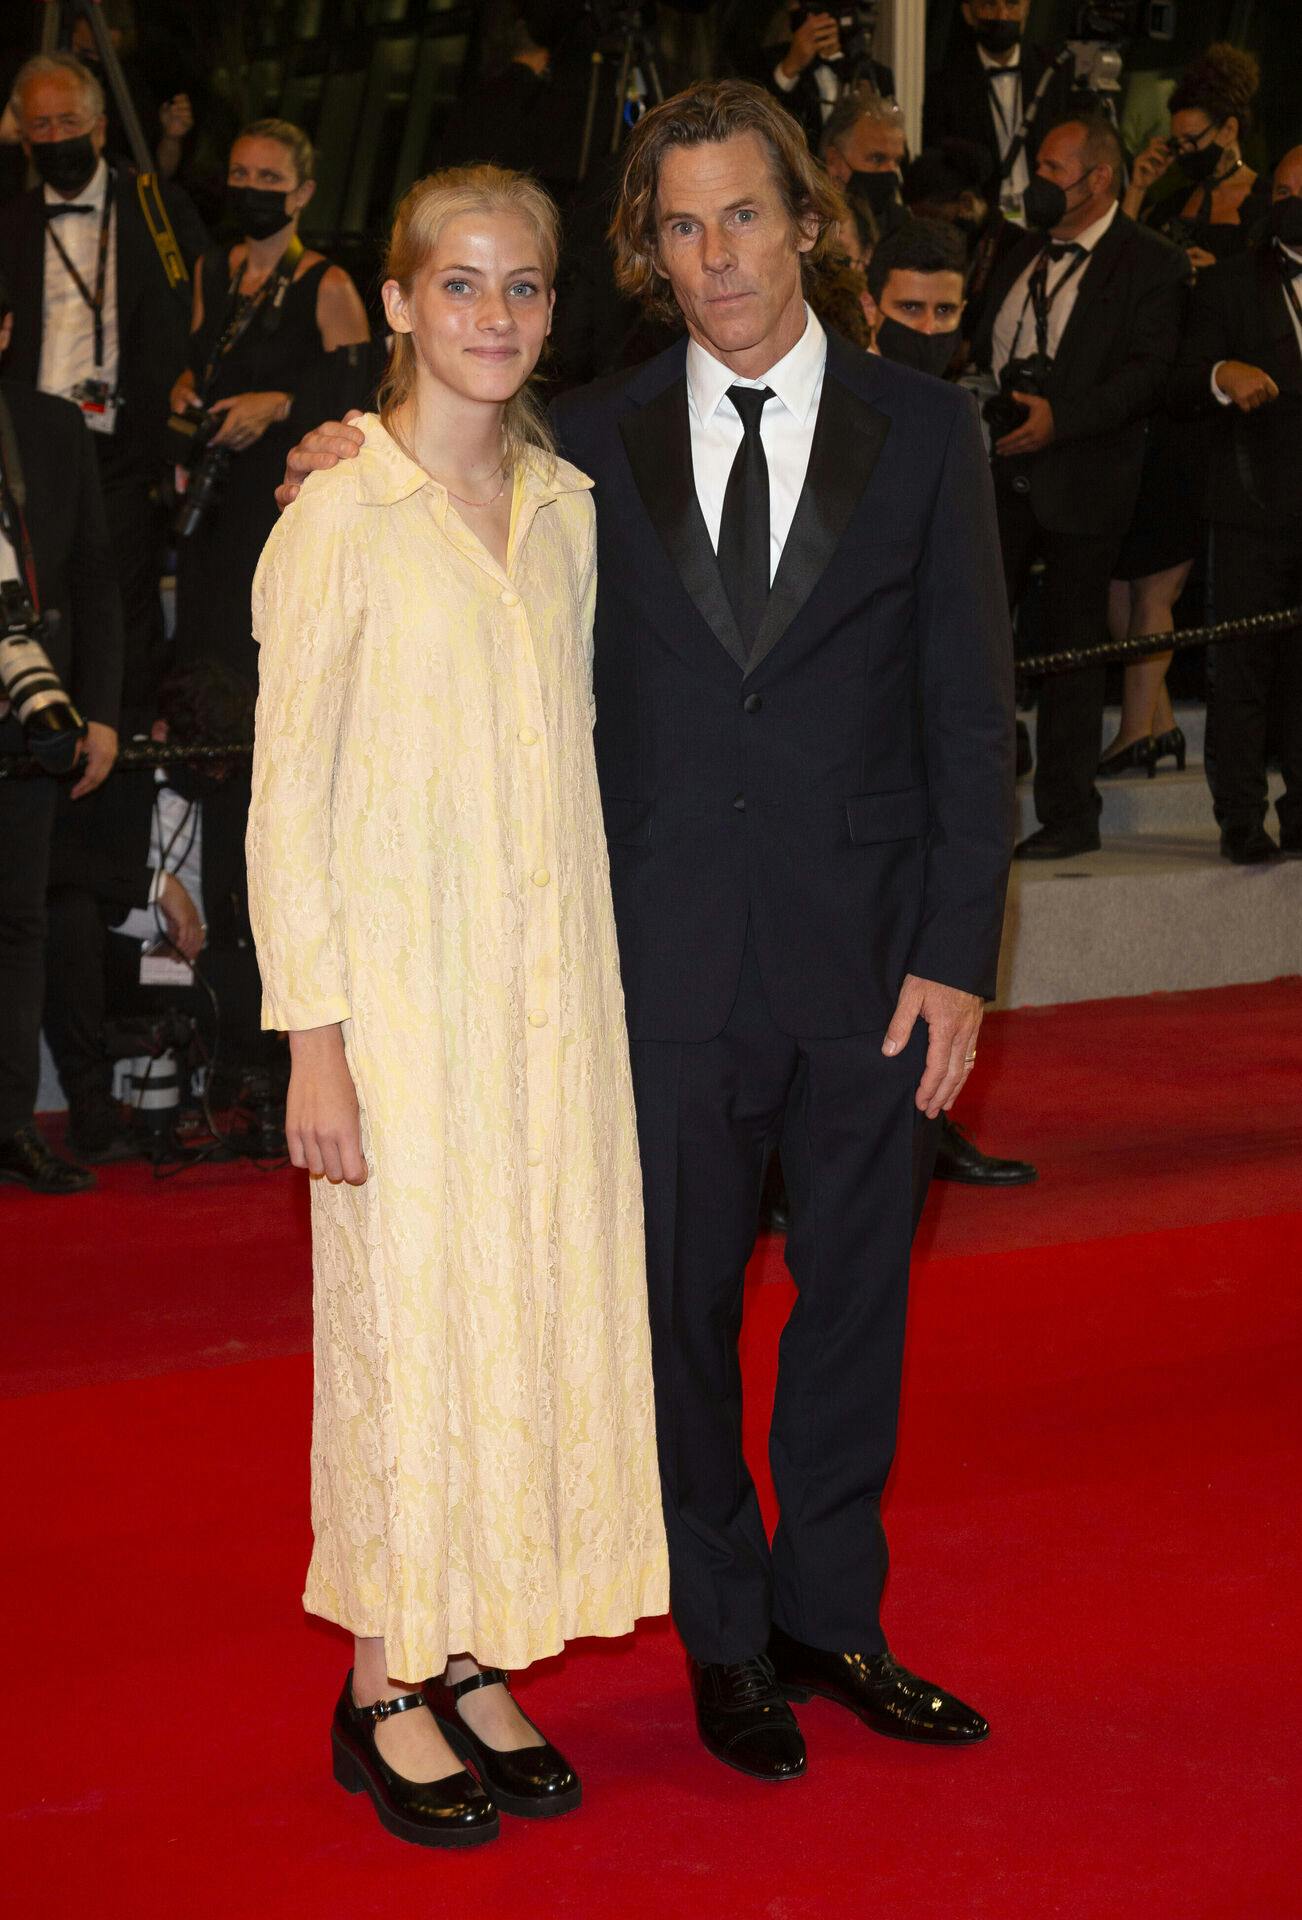 Danny Moder and daughter Hazel Moder attends the premiere of 'Flag Day' during the 74th Annual Cannes Film Festival at Palais des Festivals in Cannes, France, on 10 July 2021. Photo by: Boesl/picture-alliance/dpa/AP Images